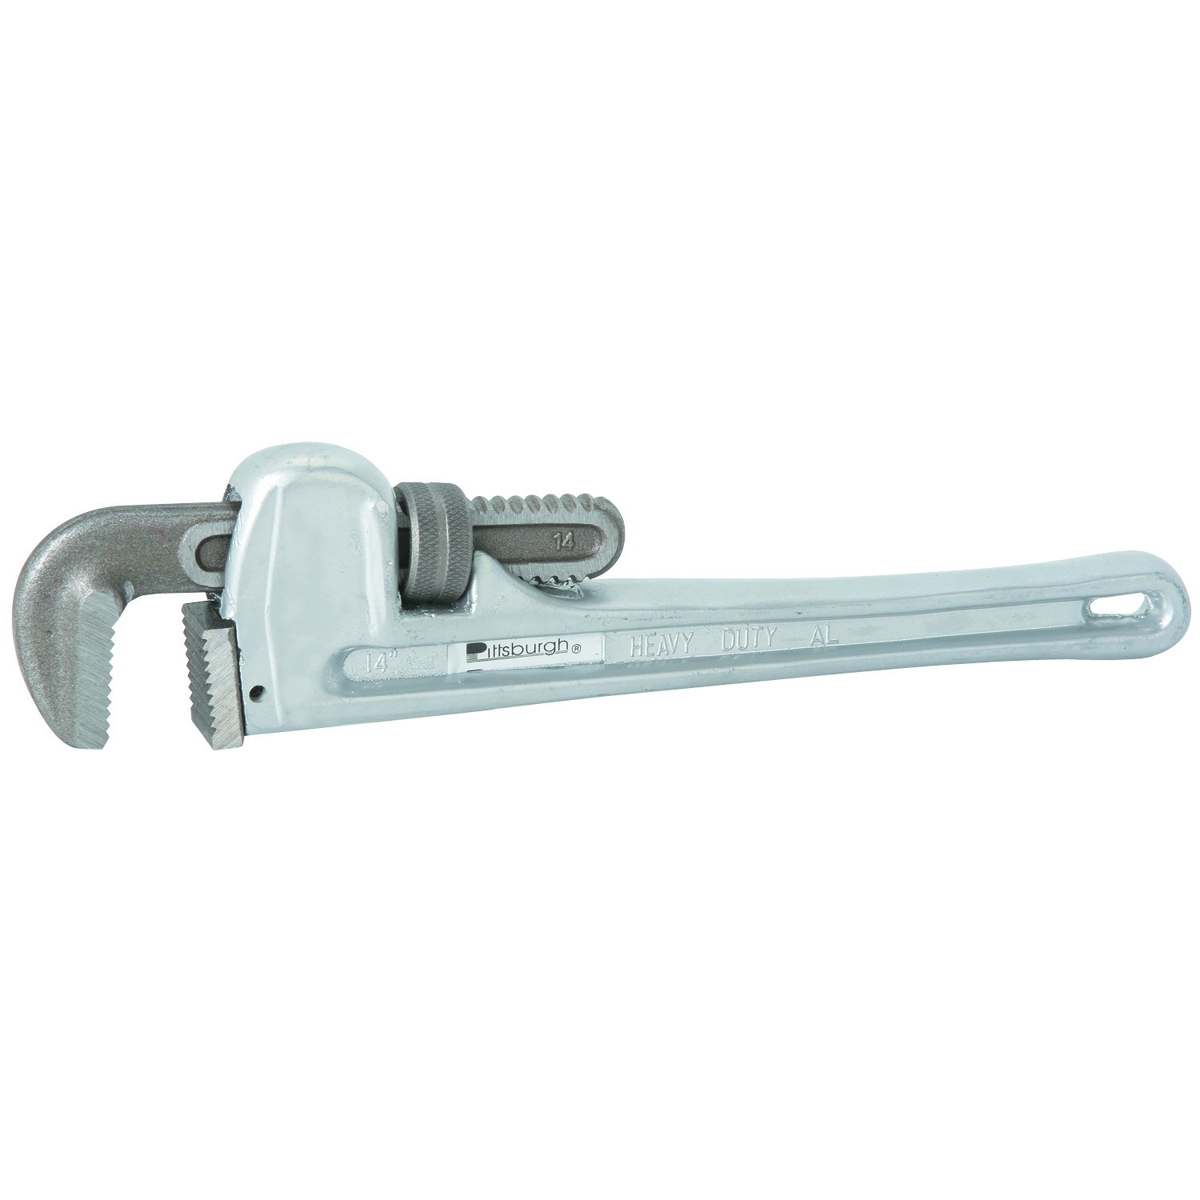 PITTSBURGH 14 in. Aluminum Pipe Wrench - Item 63651 / 39604 / 60528